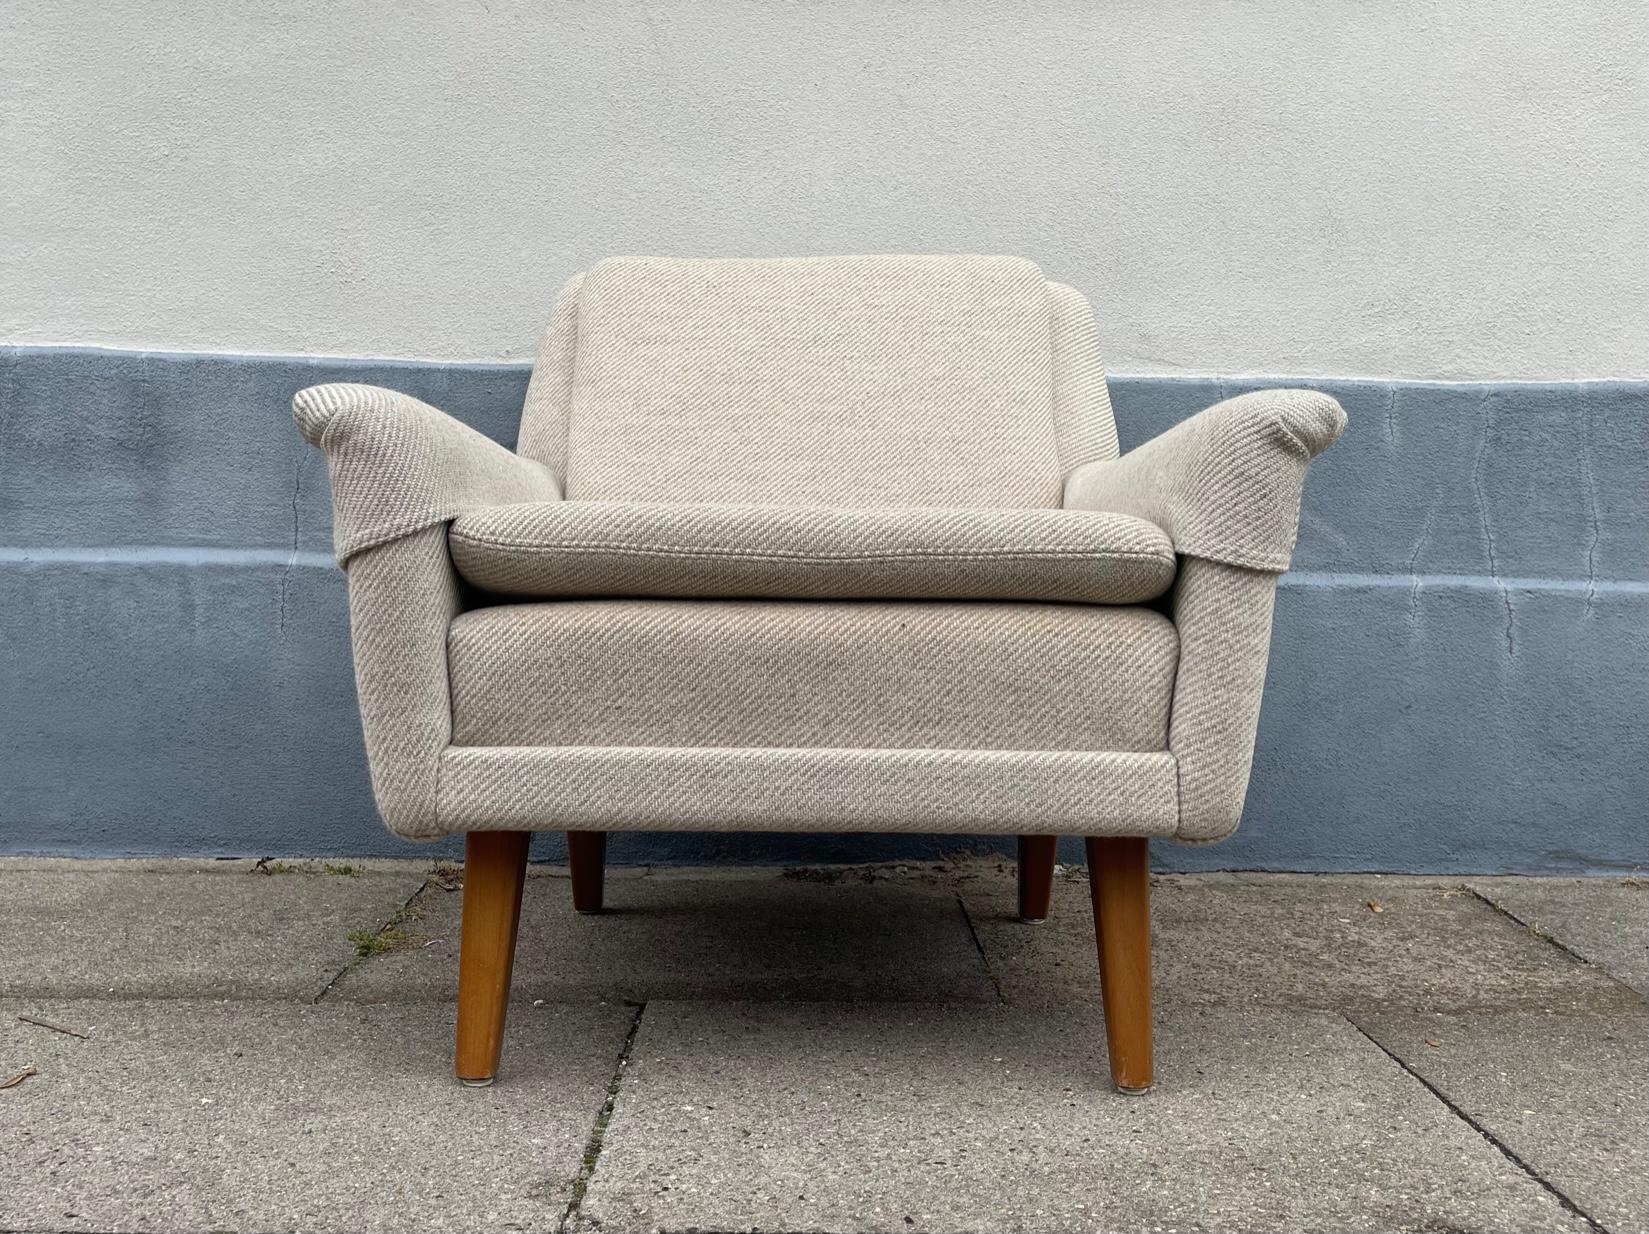 Lounge chair number designed by Swedish Architect Folke Ohlsson in 1959 and manufactured by Fritz Hansen in Denmark during the 1960s. This particular version features off white/ sand colored wool upholstery from Kvadrat and solid stained beech legs.